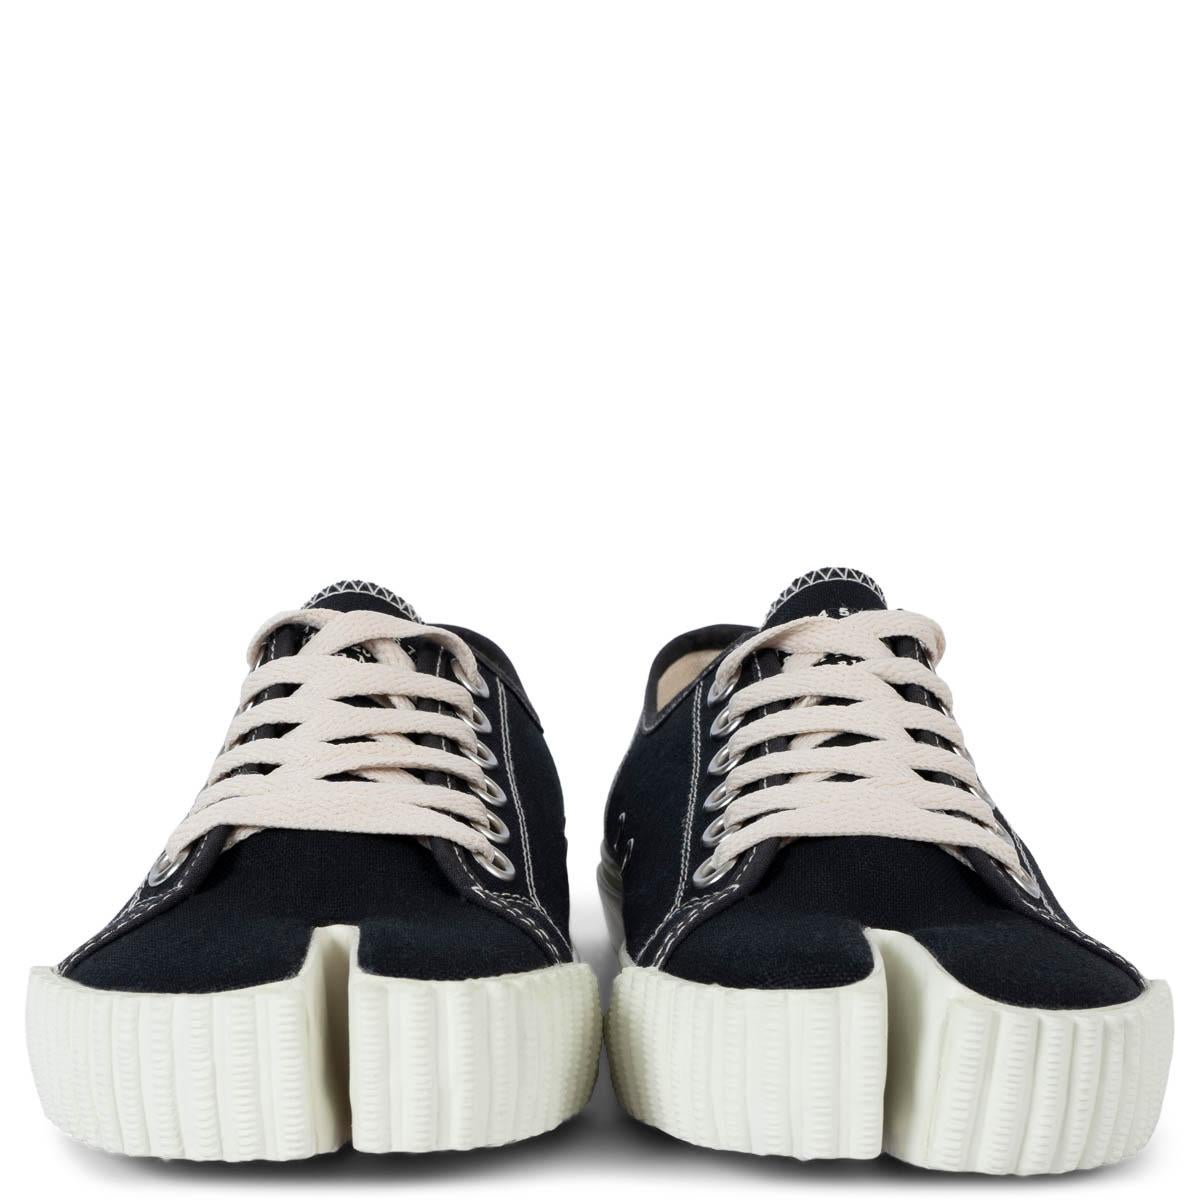 100% authentic Maison Margiela low-top Tabi sneakers in black canvas with white rubber sole. Have been worn once inside and are in virtually new condition. 

Measurements
Imprinted Size	37.5
Shoe Size	37.5
Inside Sole	24.5cm (9.6in)
Width	8.5cm